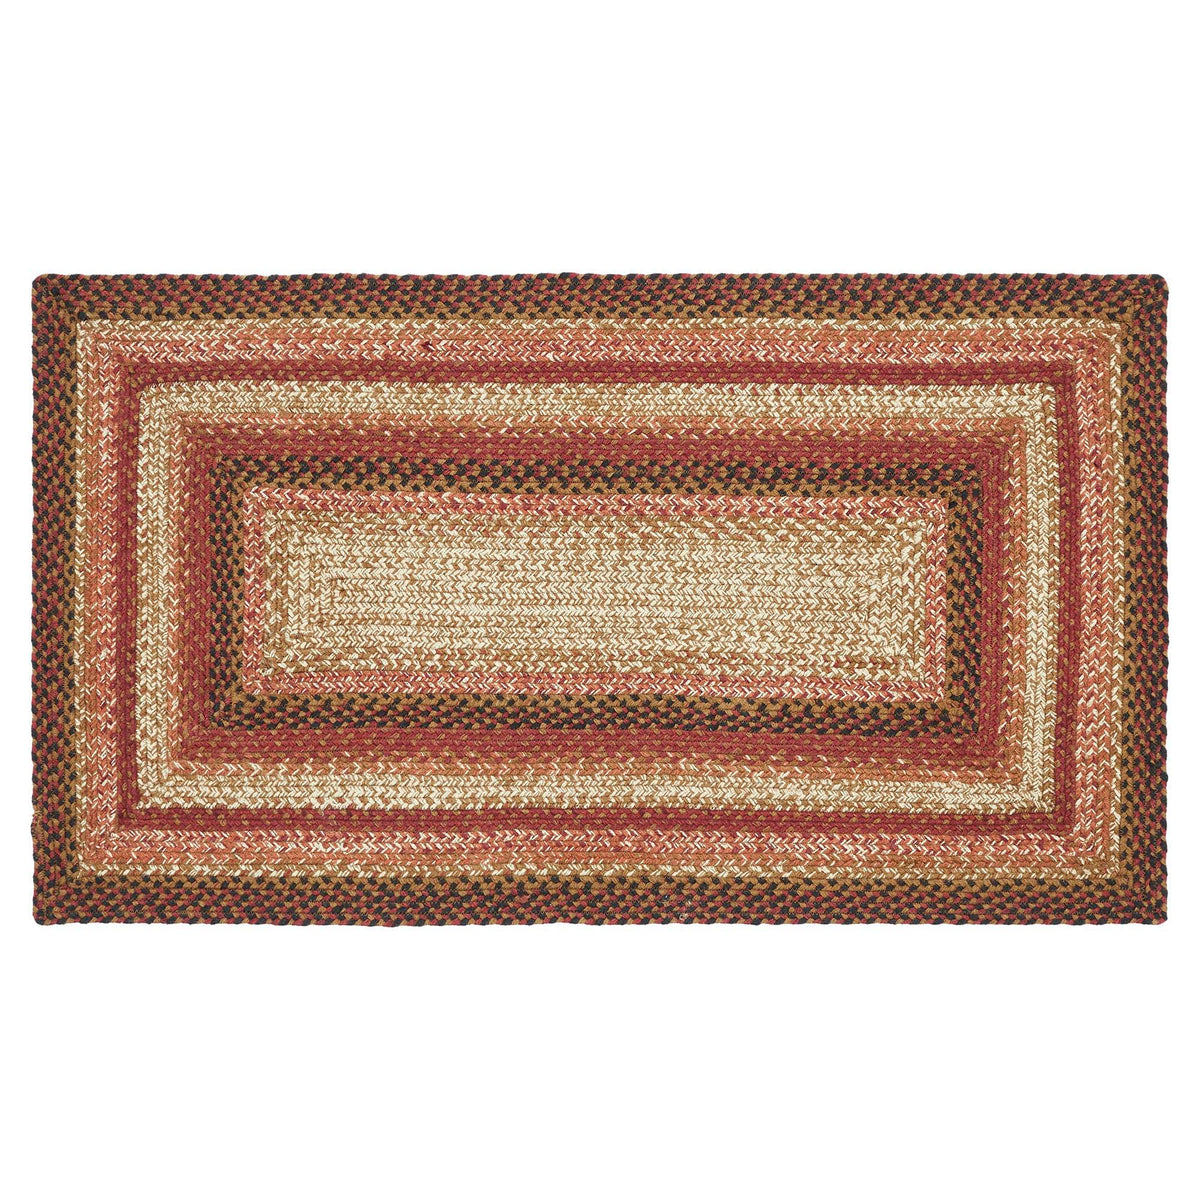 Ginger Spice Jute Rug Rect w/ Pad 27x48